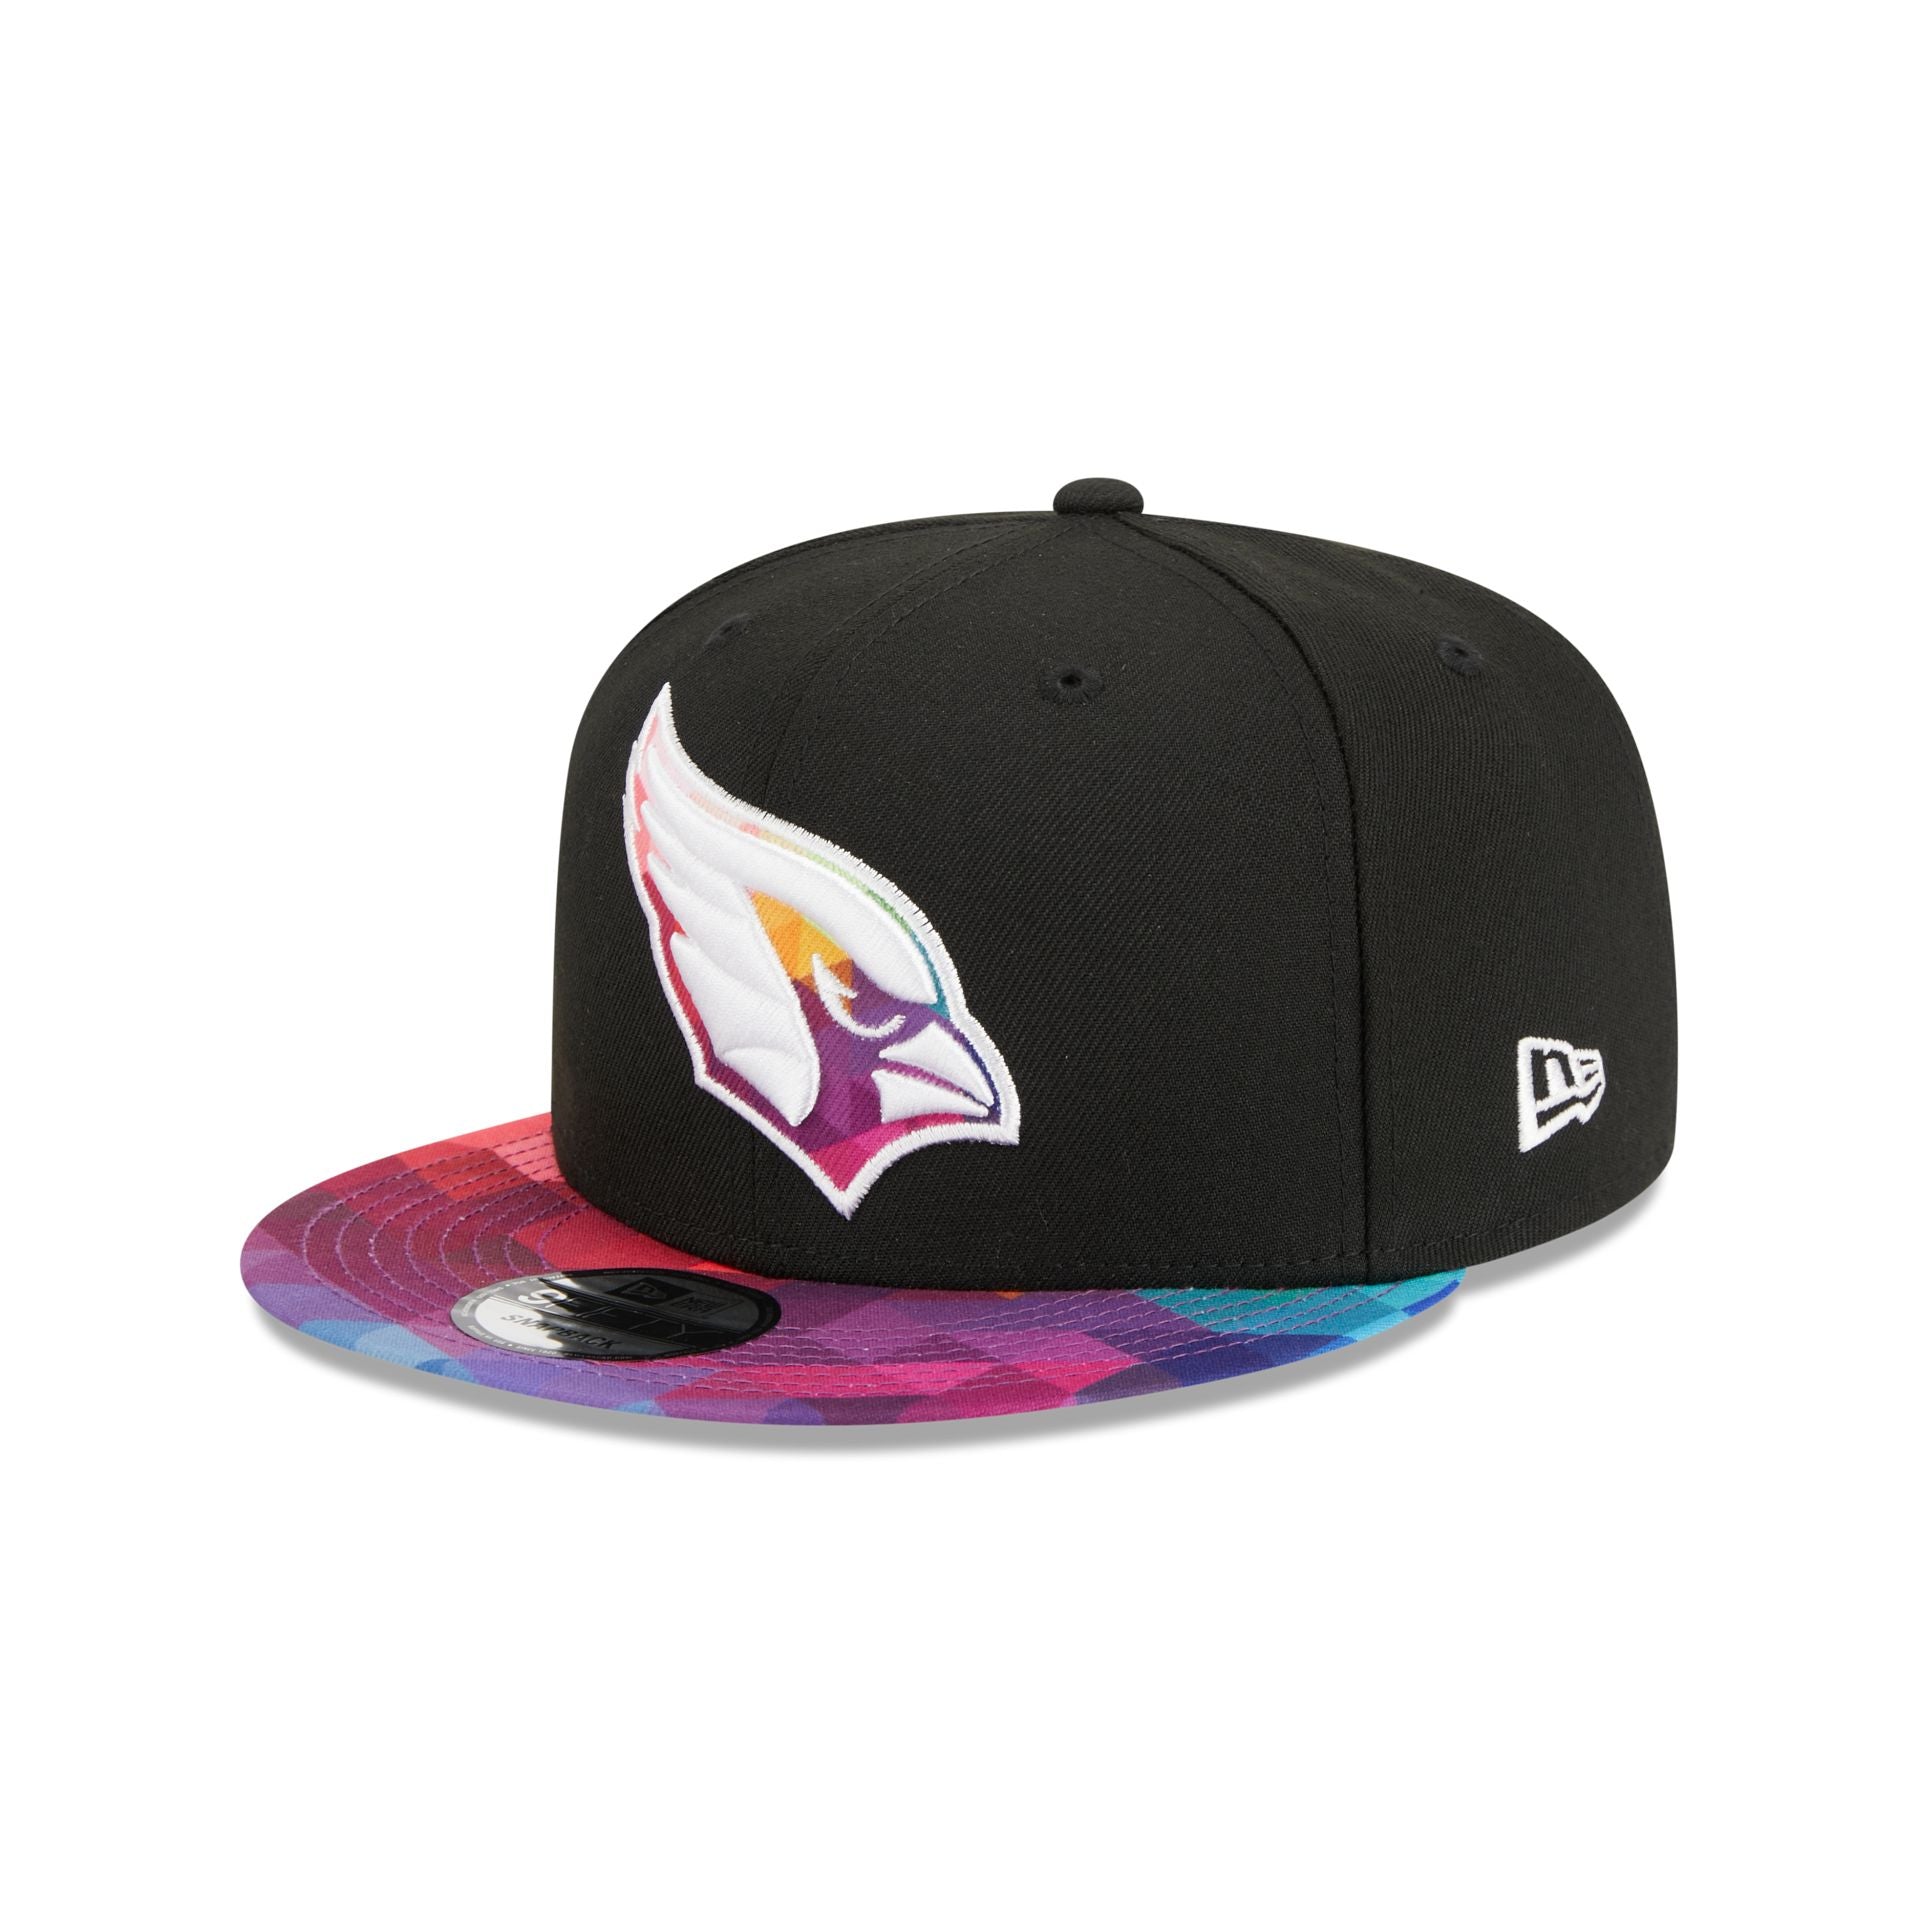 St. Louis Cardinals New Era Spring Basic Two-Tone 9FIFTY Snapback Hat -  Light Blue/Red